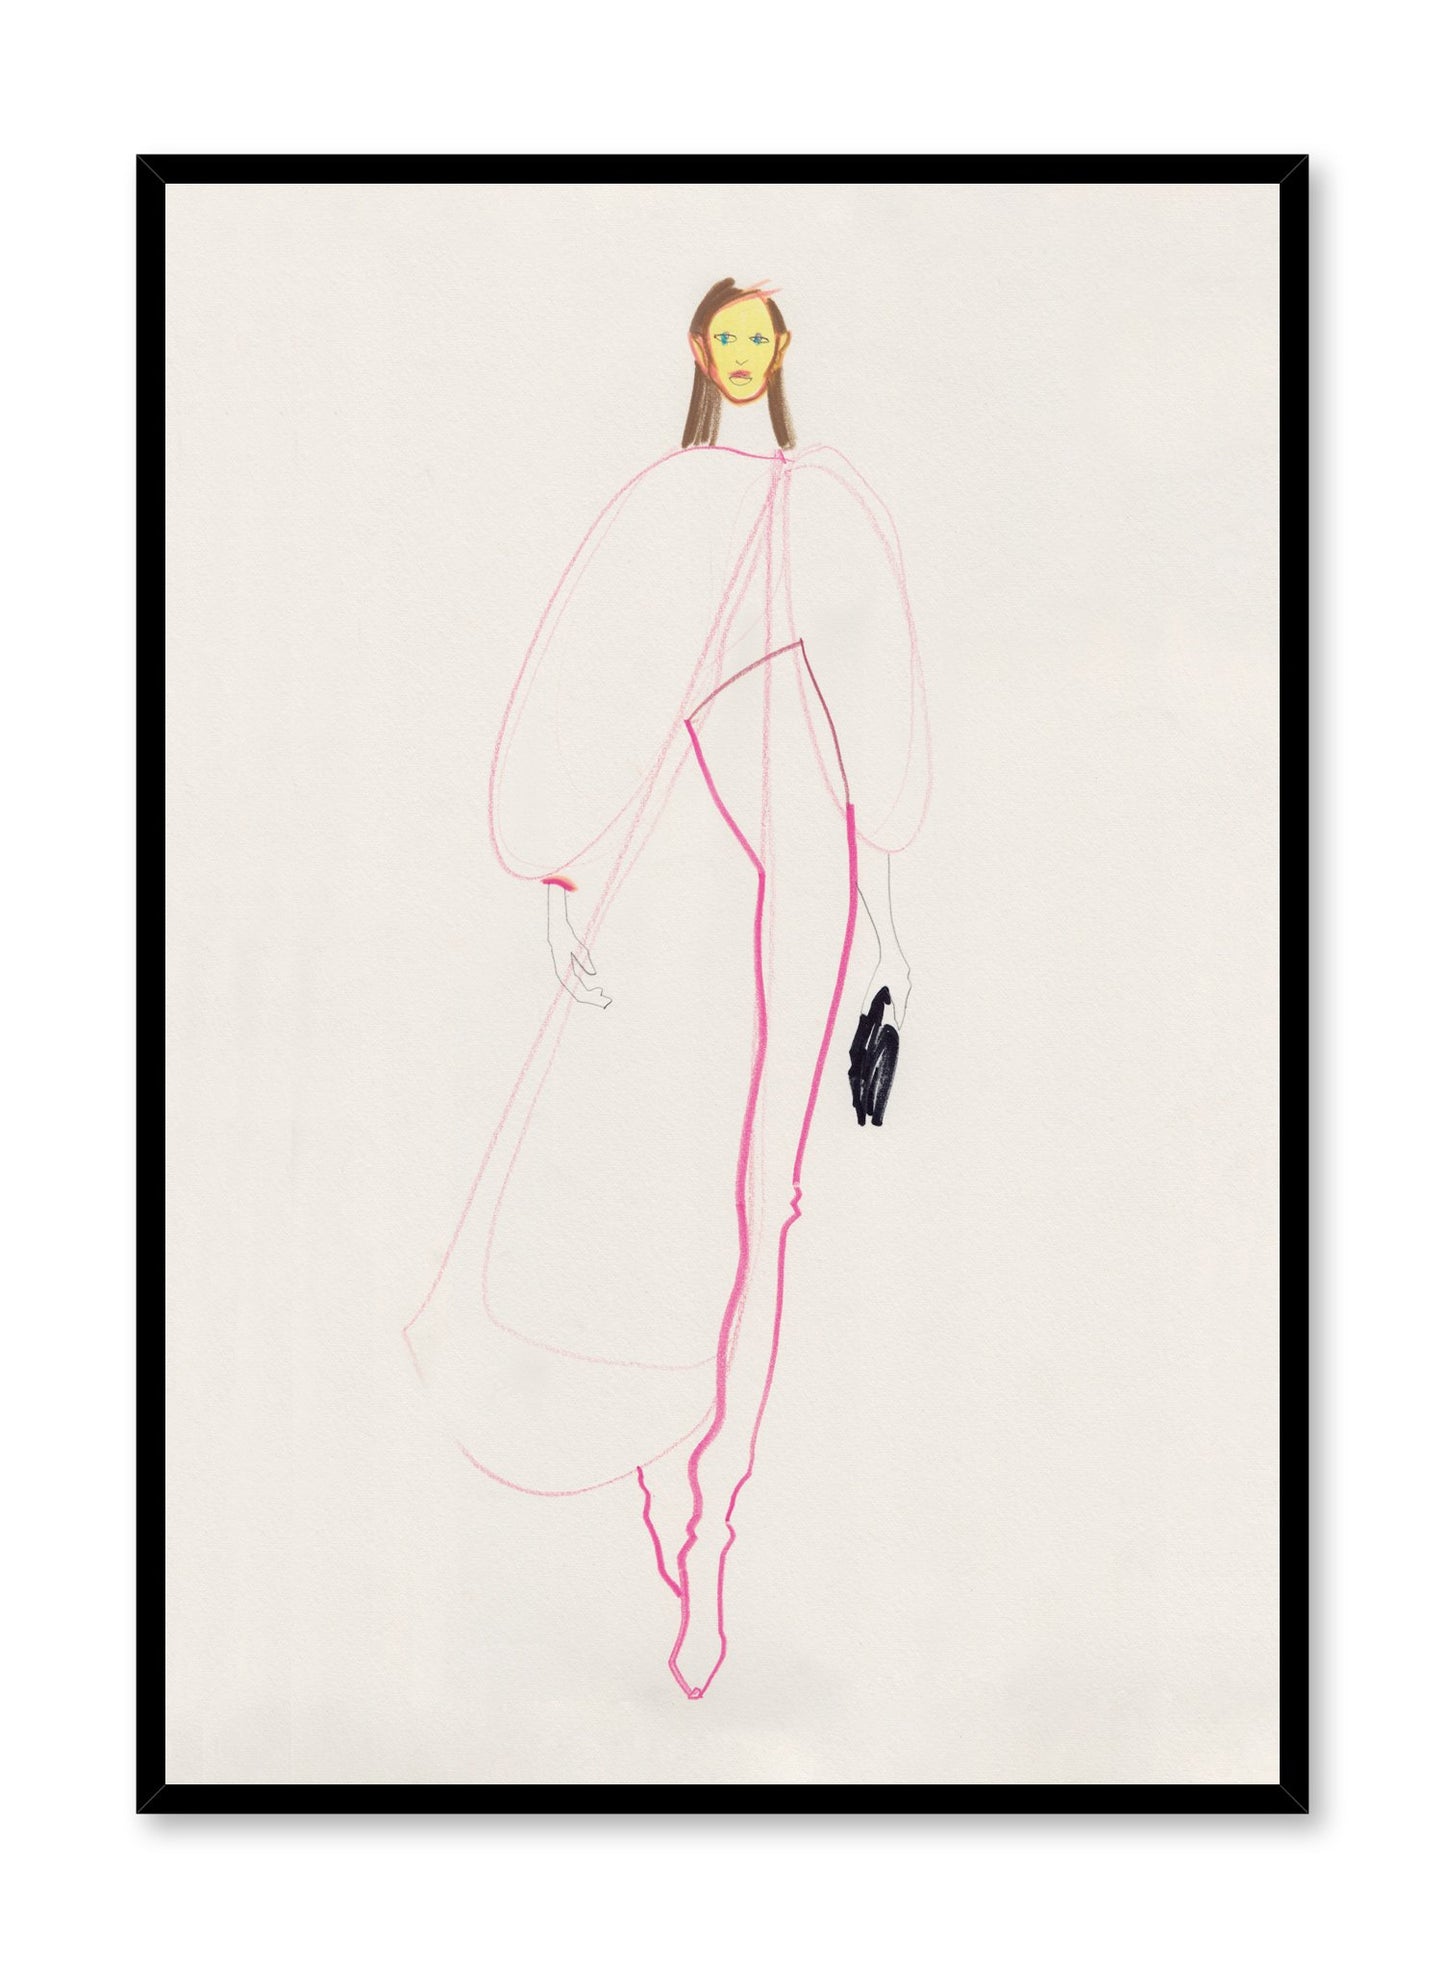 Minimalist fashion print by Opposite Wall of a tall model character wearing a white flowy jacket and white pants outlined in pink.